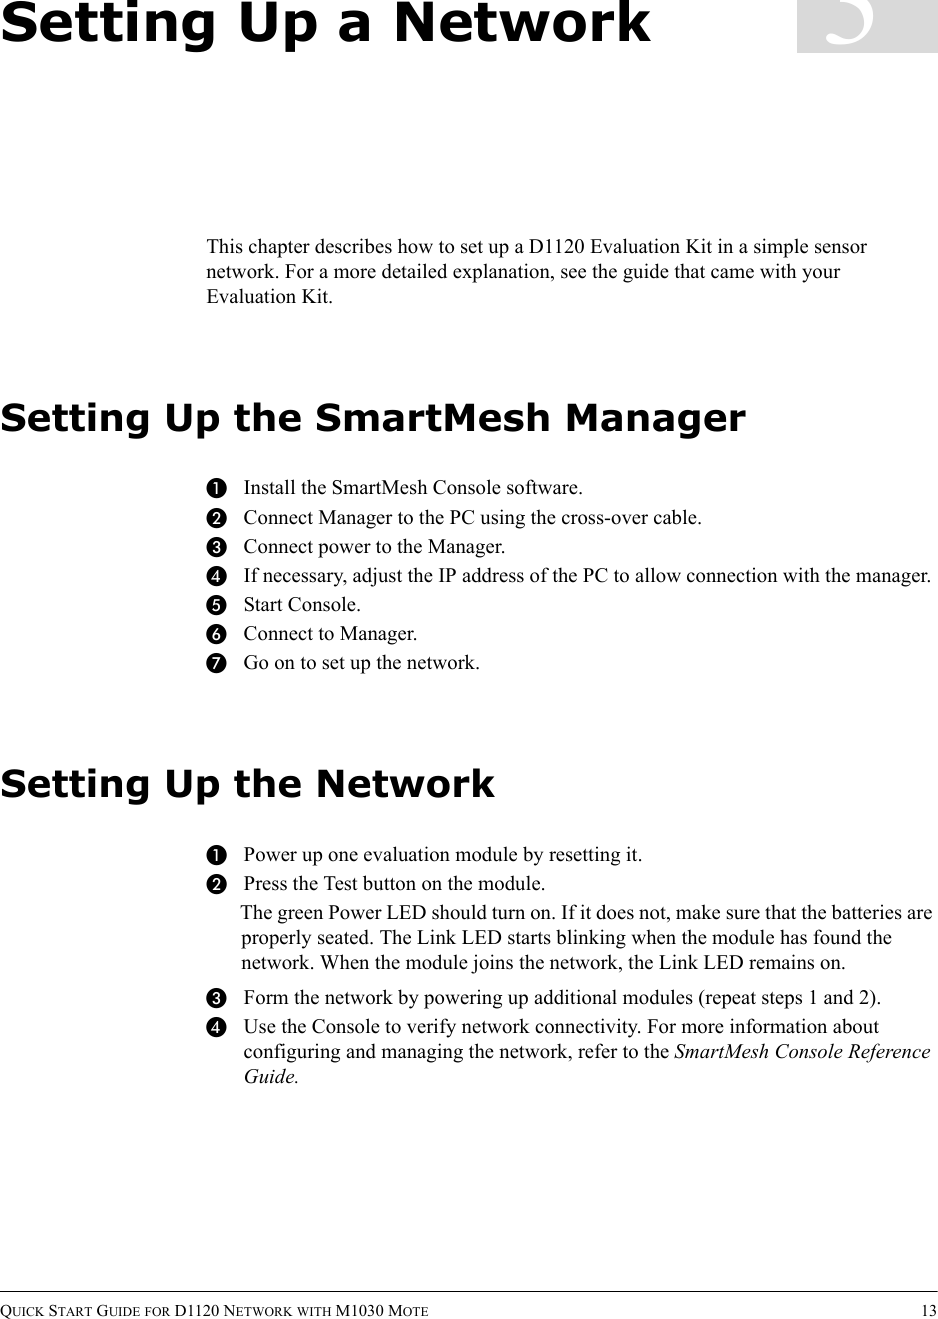 QUICK START GUIDE FOR D1120 NETWORK WITH M1030 MOTE 133Setting Up a NetworkThis chapter describes how to set up a D1120 Evaluation Kit in a simple sensor network. For a more detailed explanation, see the guide that came with your Evaluation Kit.Setting Up the SmartMesh ManagerAInstall the SmartMesh Console software.BConnect Manager to the PC using the cross-over cable.CConnect power to the Manager.DIf necessary, adjust the IP address of the PC to allow connection with the manager.EStart Console.FConnect to Manager.GGo on to set up the network.Setting Up the NetworkAPower up one evaluation module by resetting it.BPress the Test button on the module.The green Power LED should turn on. If it does not, make sure that the batteries are properly seated. The Link LED starts blinking when the module has found the network. When the module joins the network, the Link LED remains on.CForm the network by powering up additional modules (repeat steps 1 and 2).DUse the Console to verify network connectivity. For more information about configuring and managing the network, refer to the SmartMesh Console Reference Guide.